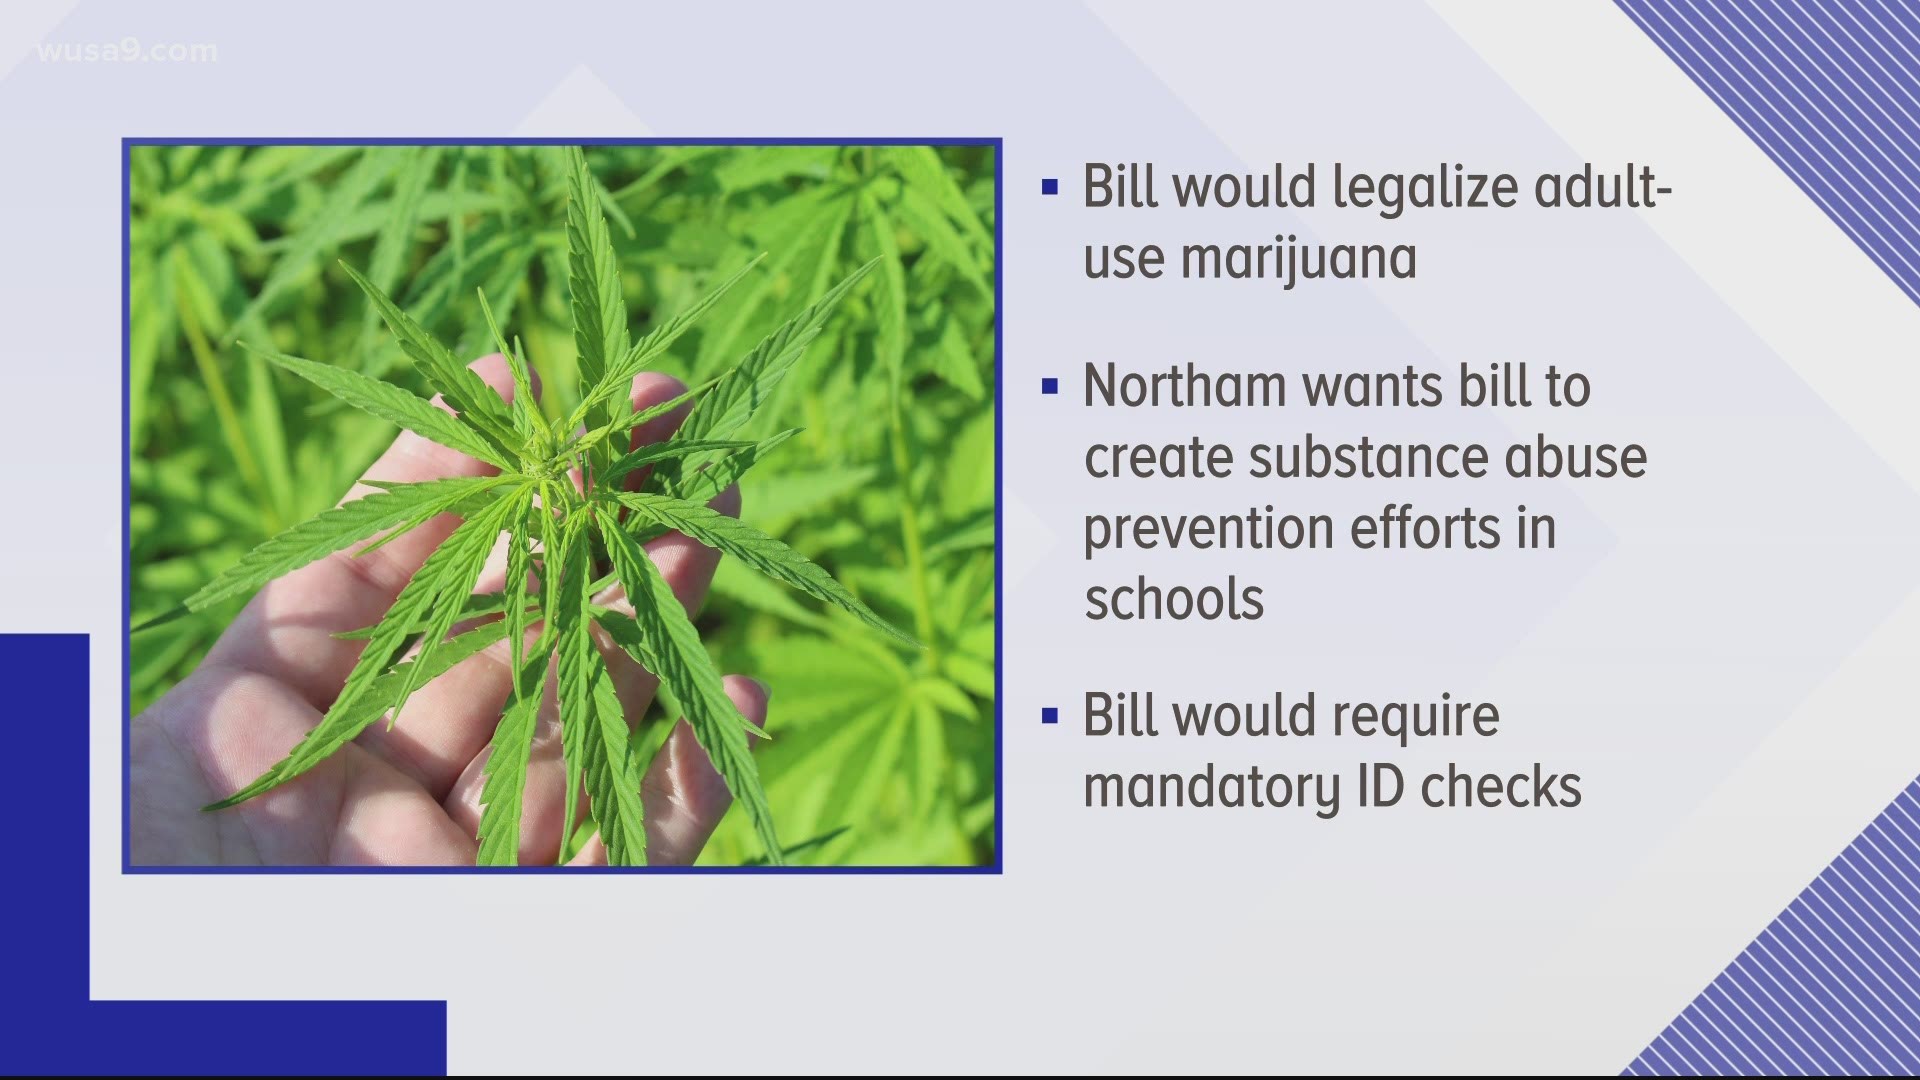 Northam announced Monday that he will introduce and support legislation to legalize marijuana in Virginia.